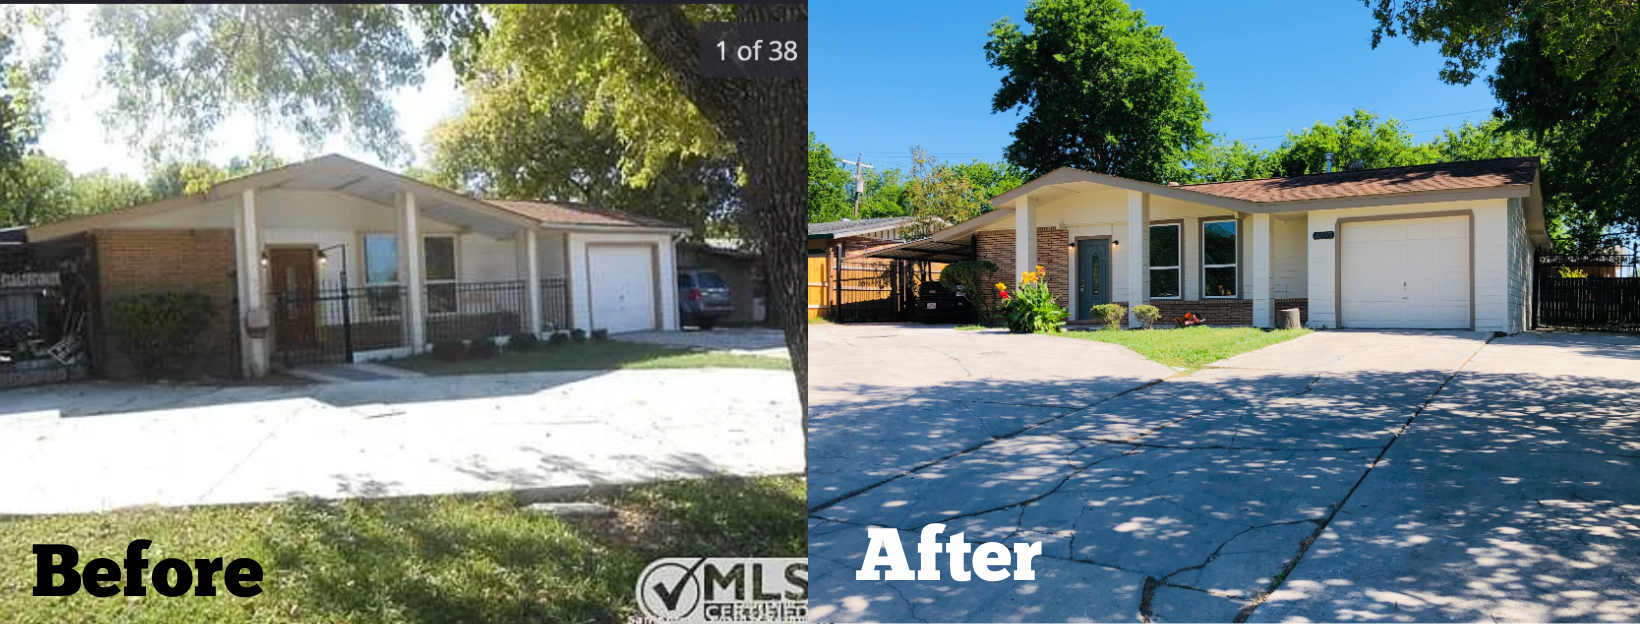 before and after rental property